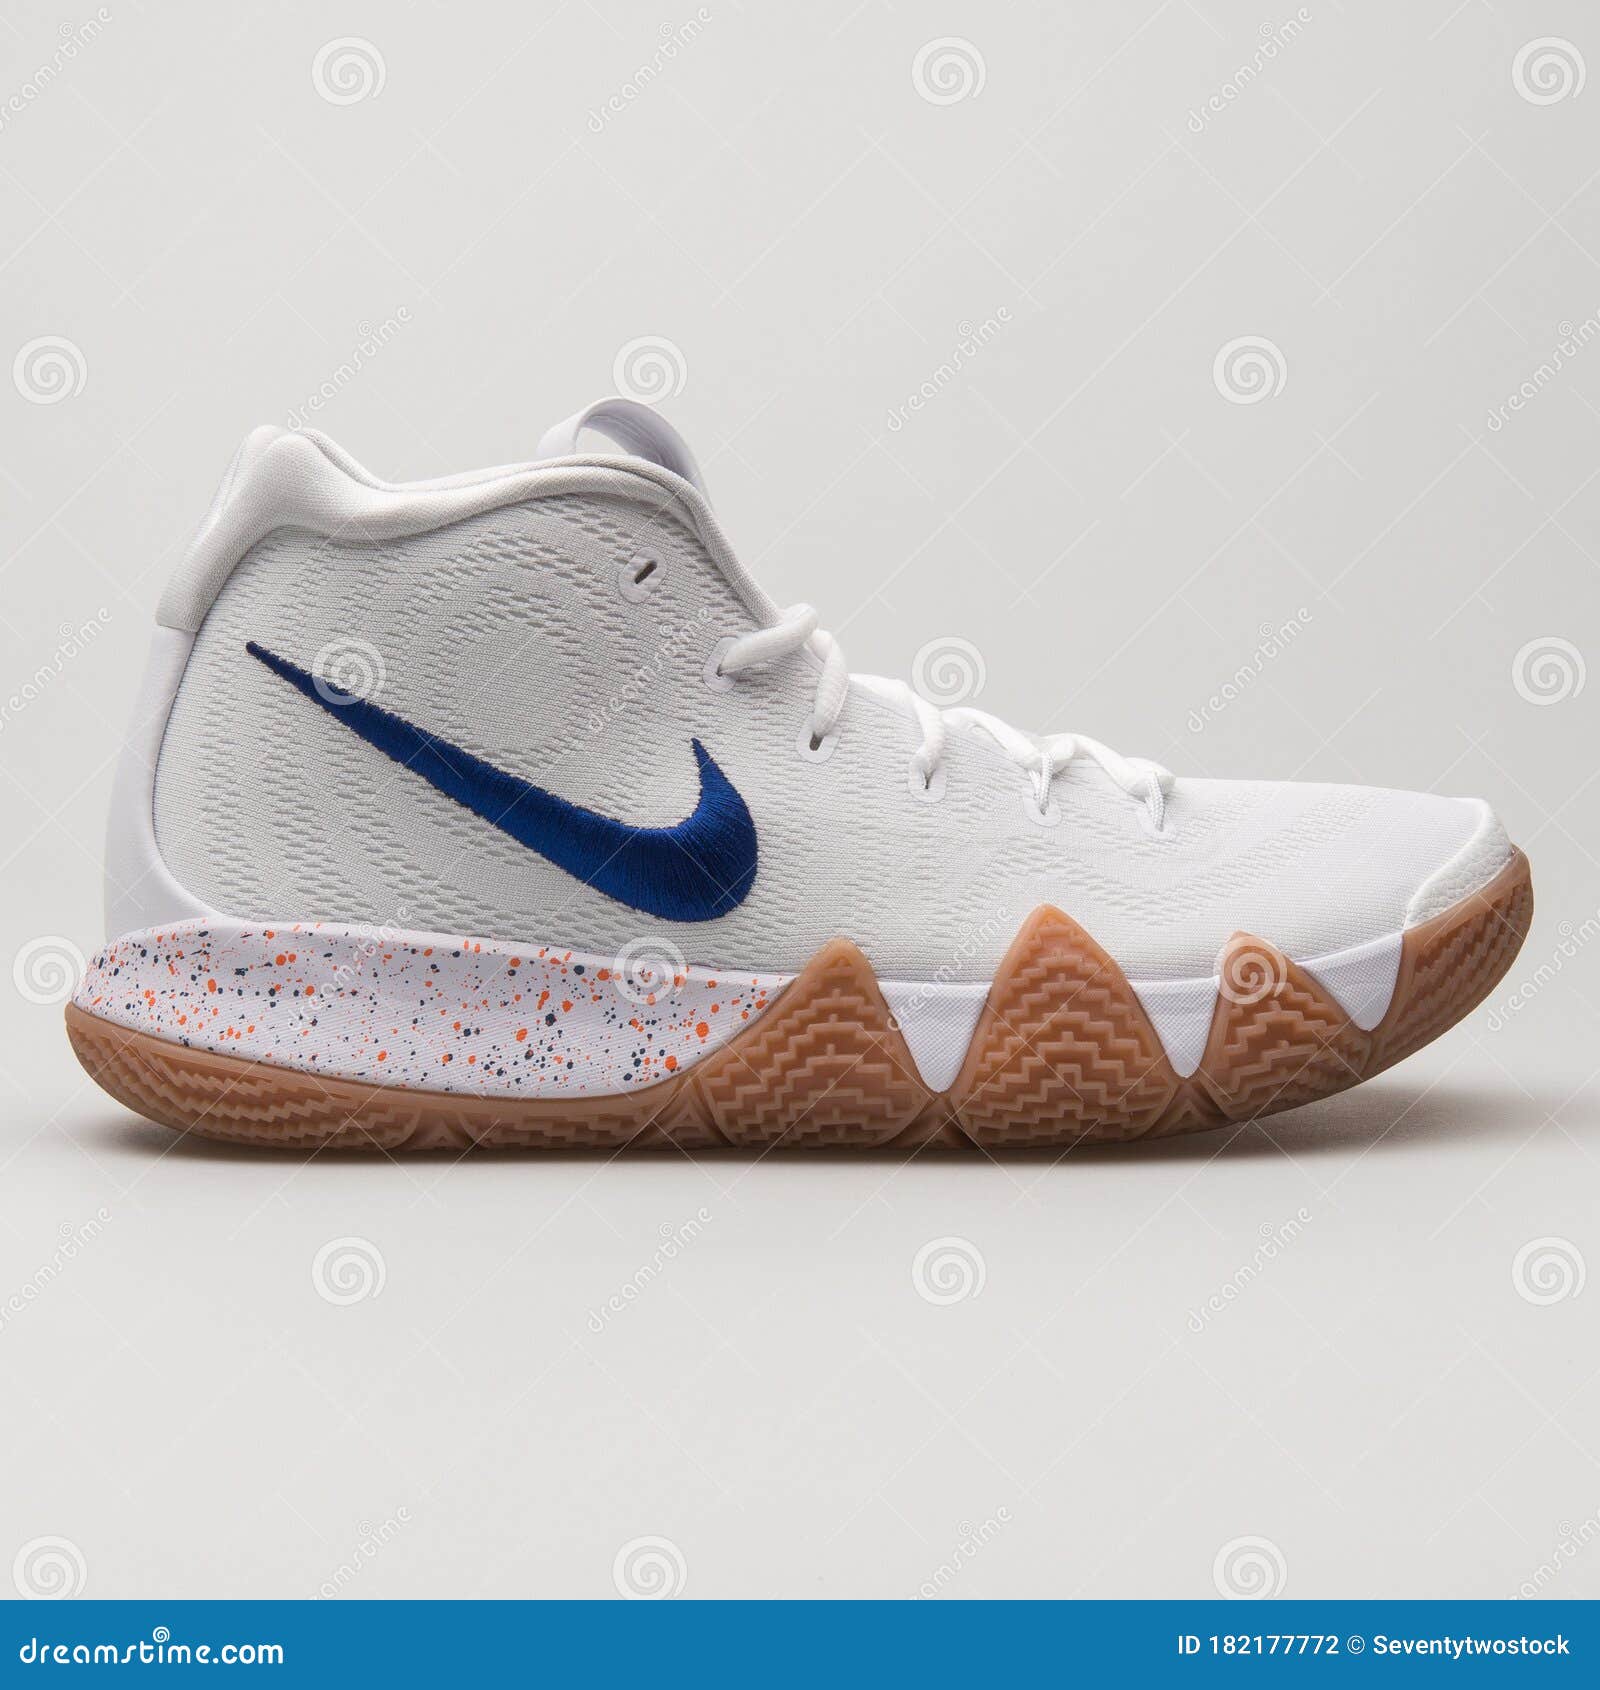 kyrie 4 white and blue